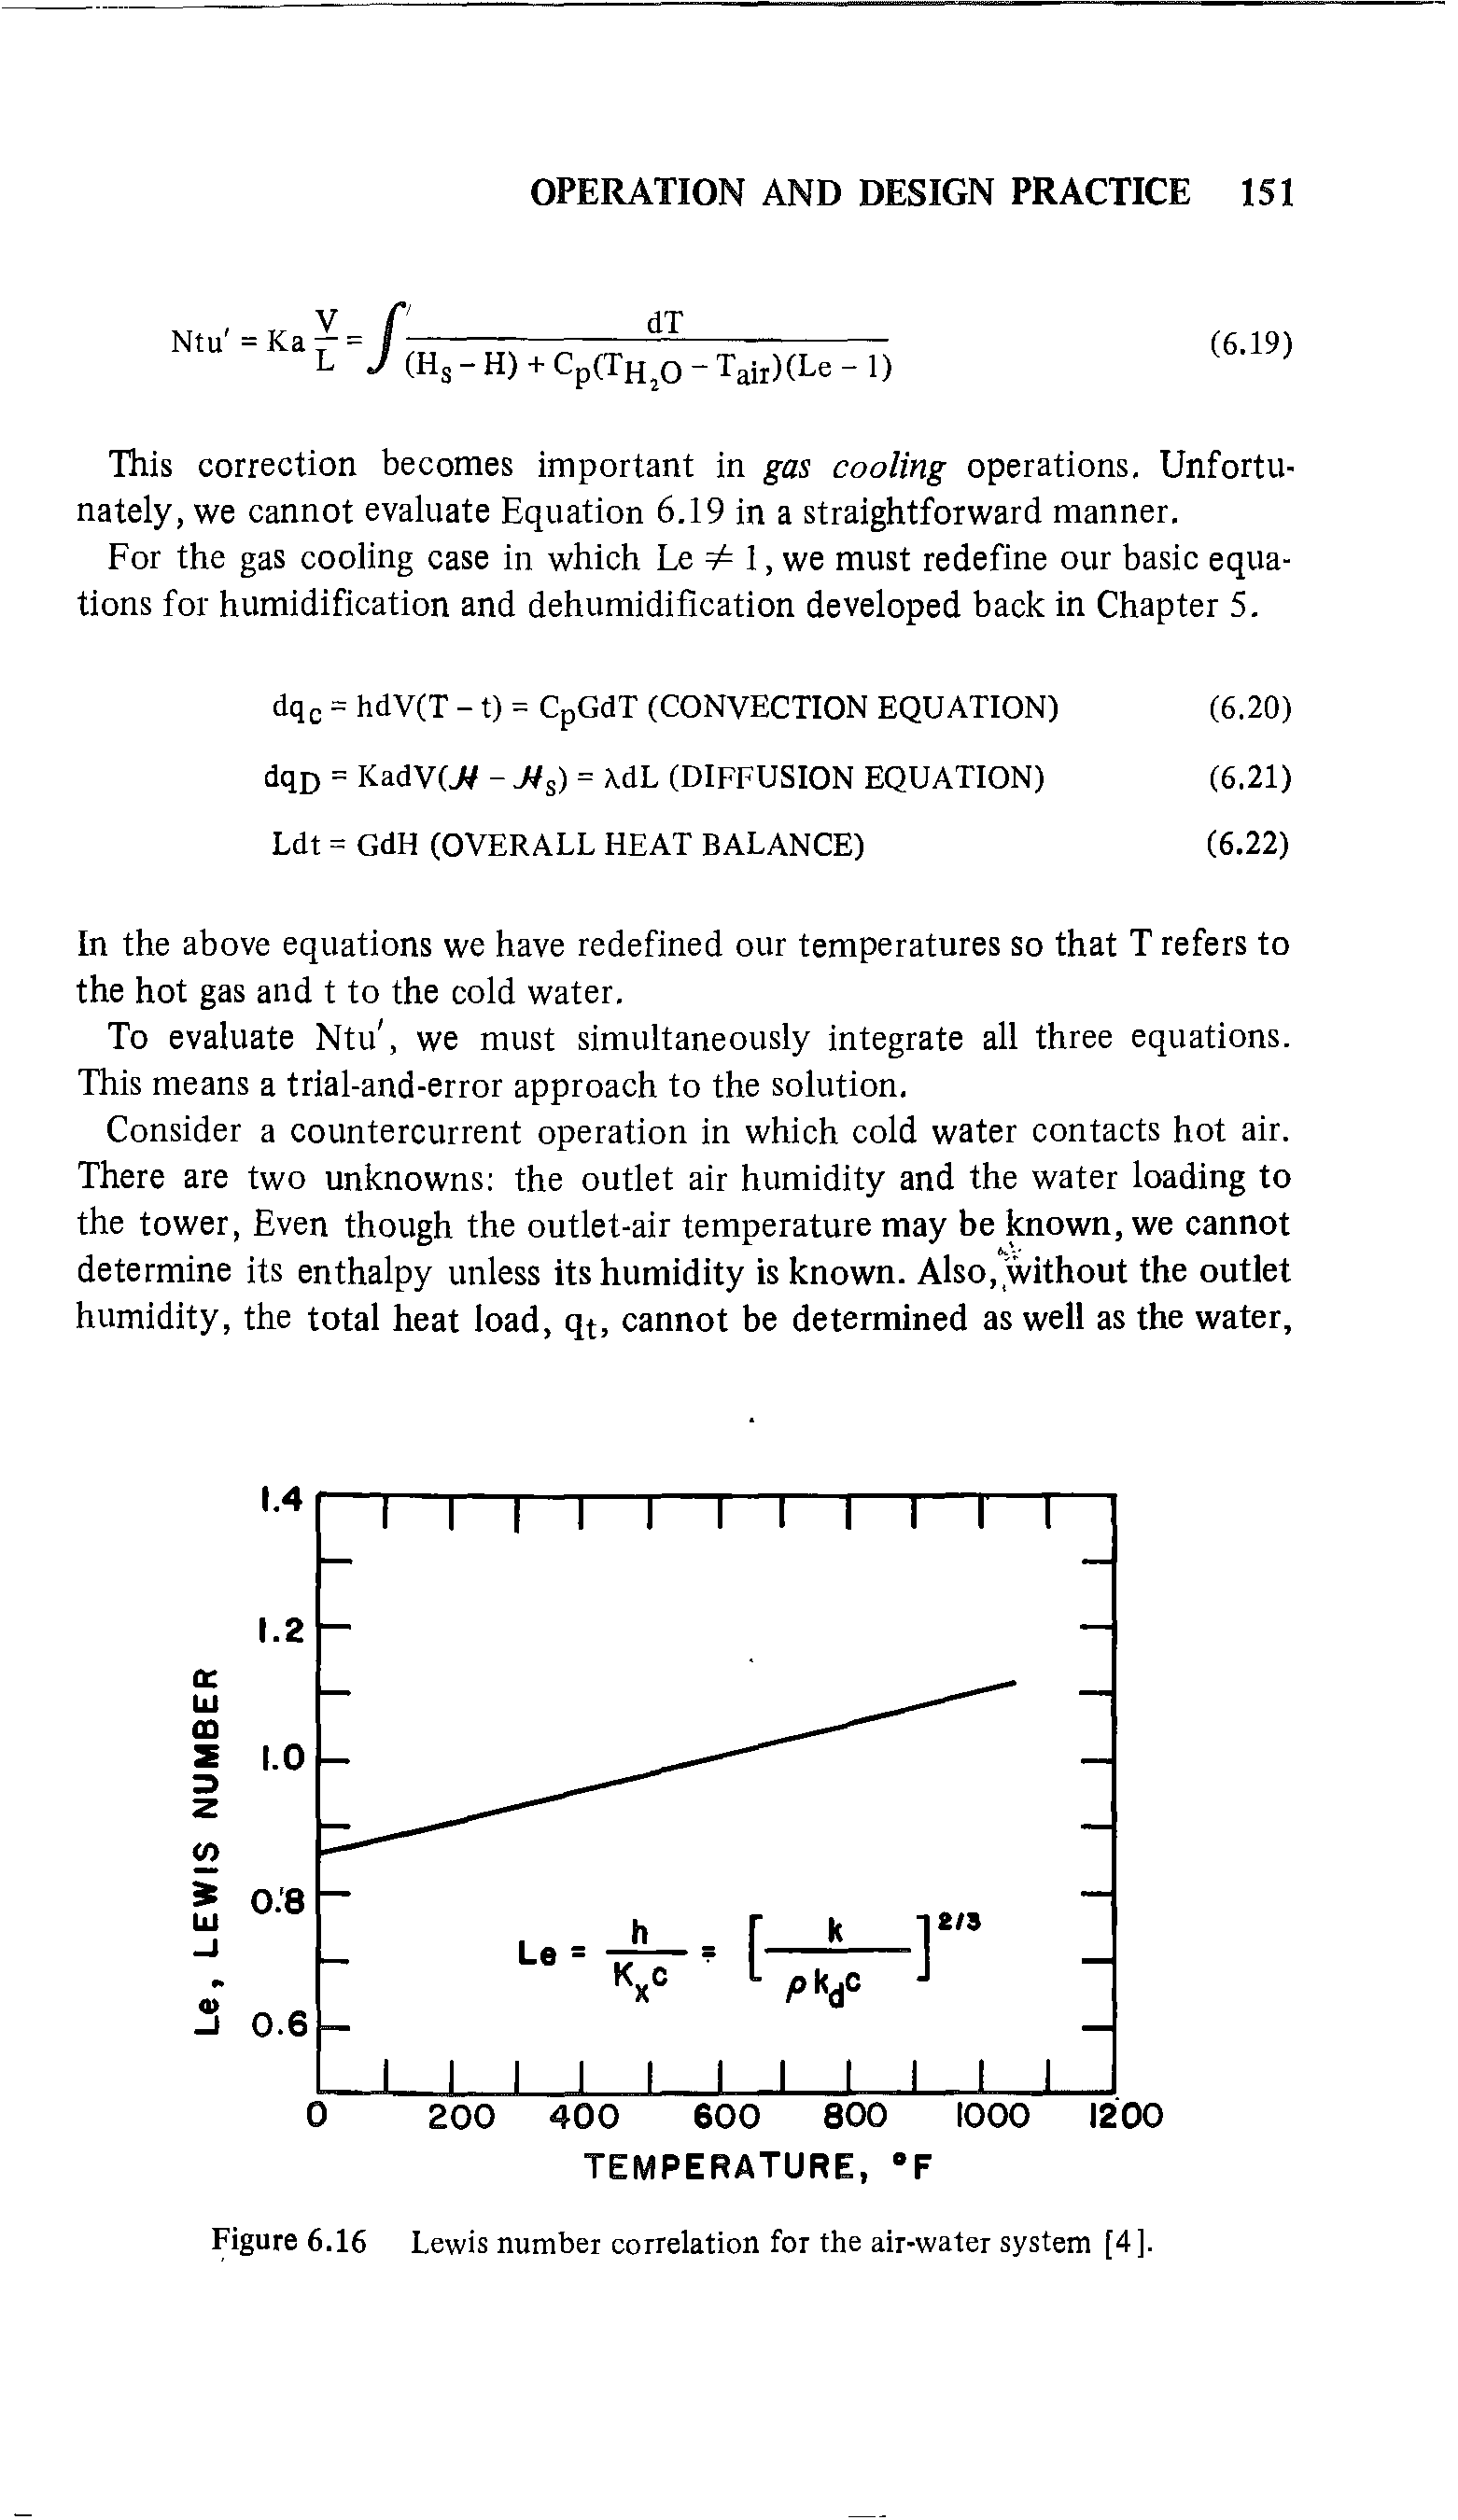 Figure 6.16 Lewis number correlation for the air-water system [4].